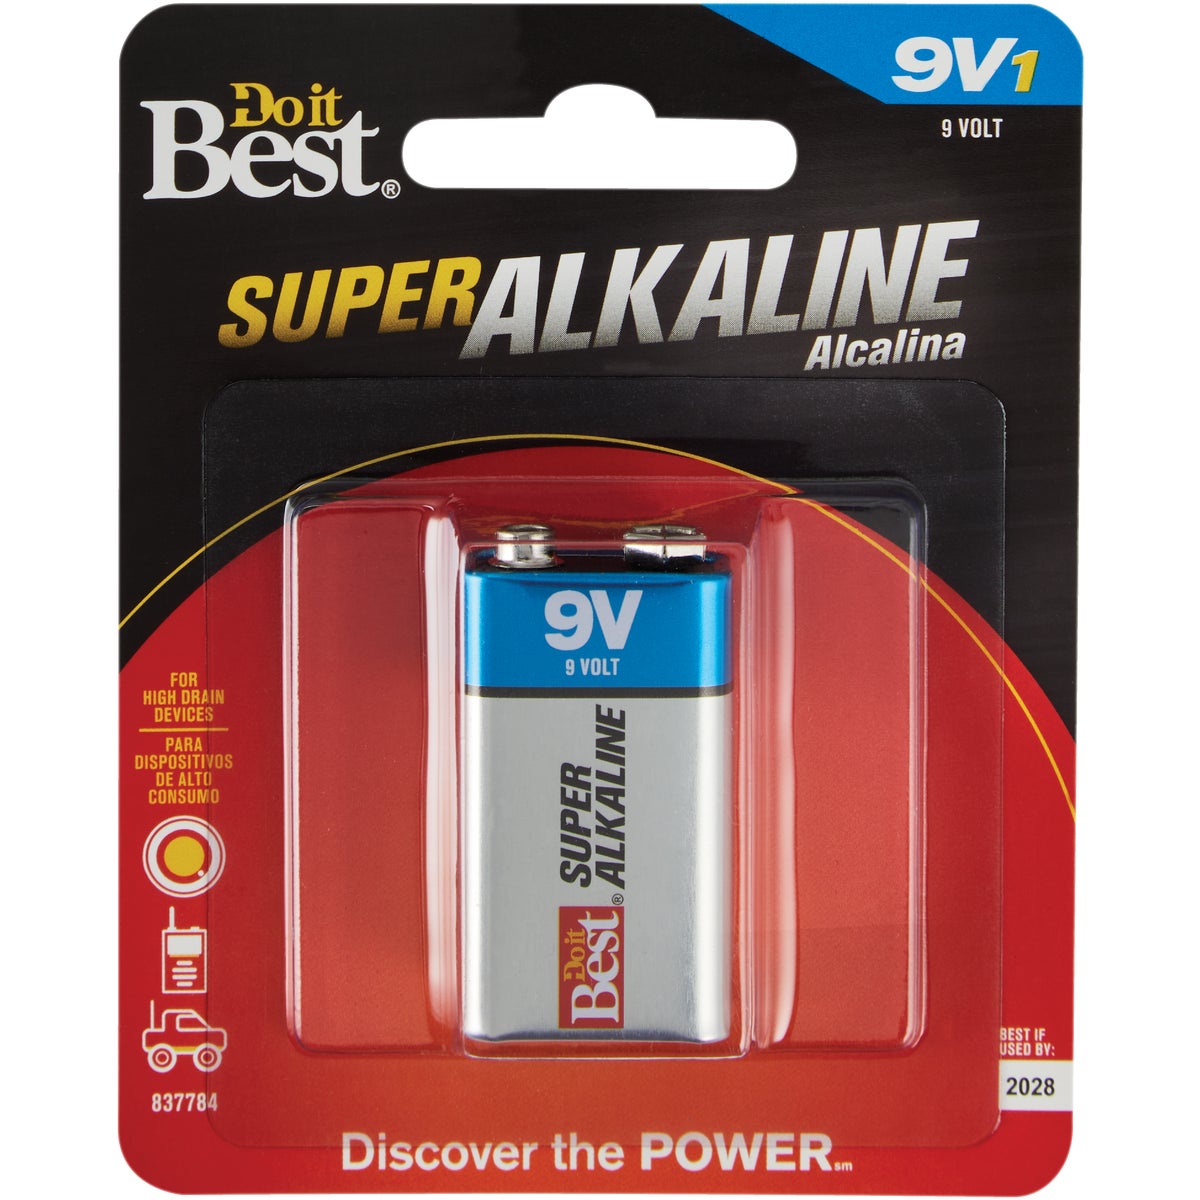 Item 837784, Alkaline batteries featuring quality and performance comparable to leading 